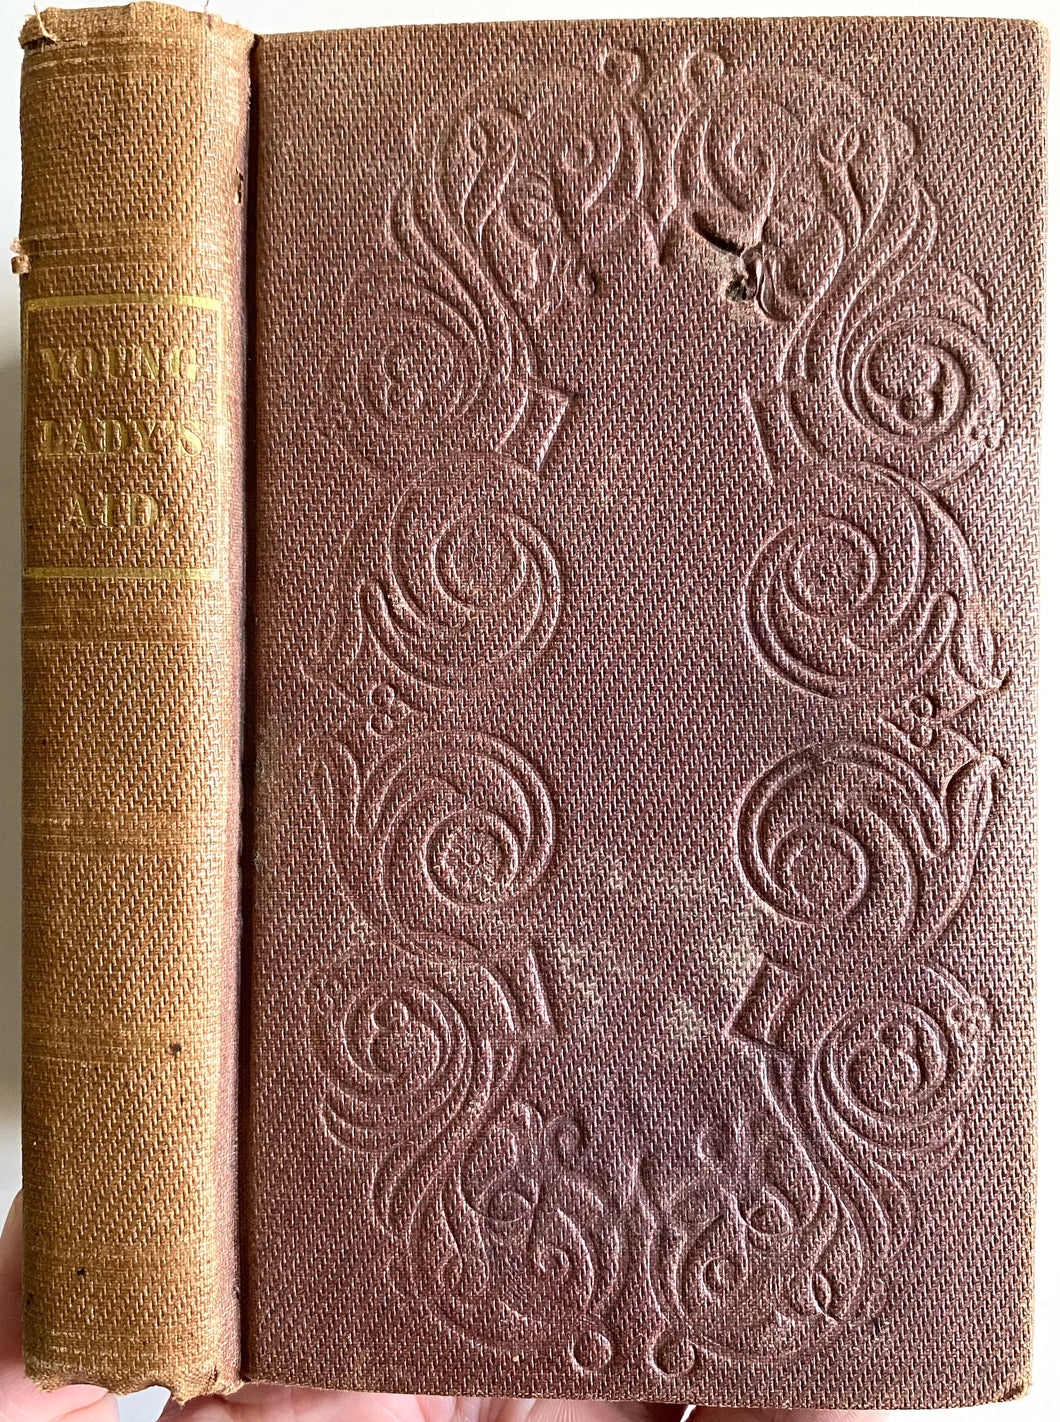 1839 FEMALE PIETY. Rare Work on Female Godliness & Benefits of Christ to Women in History.